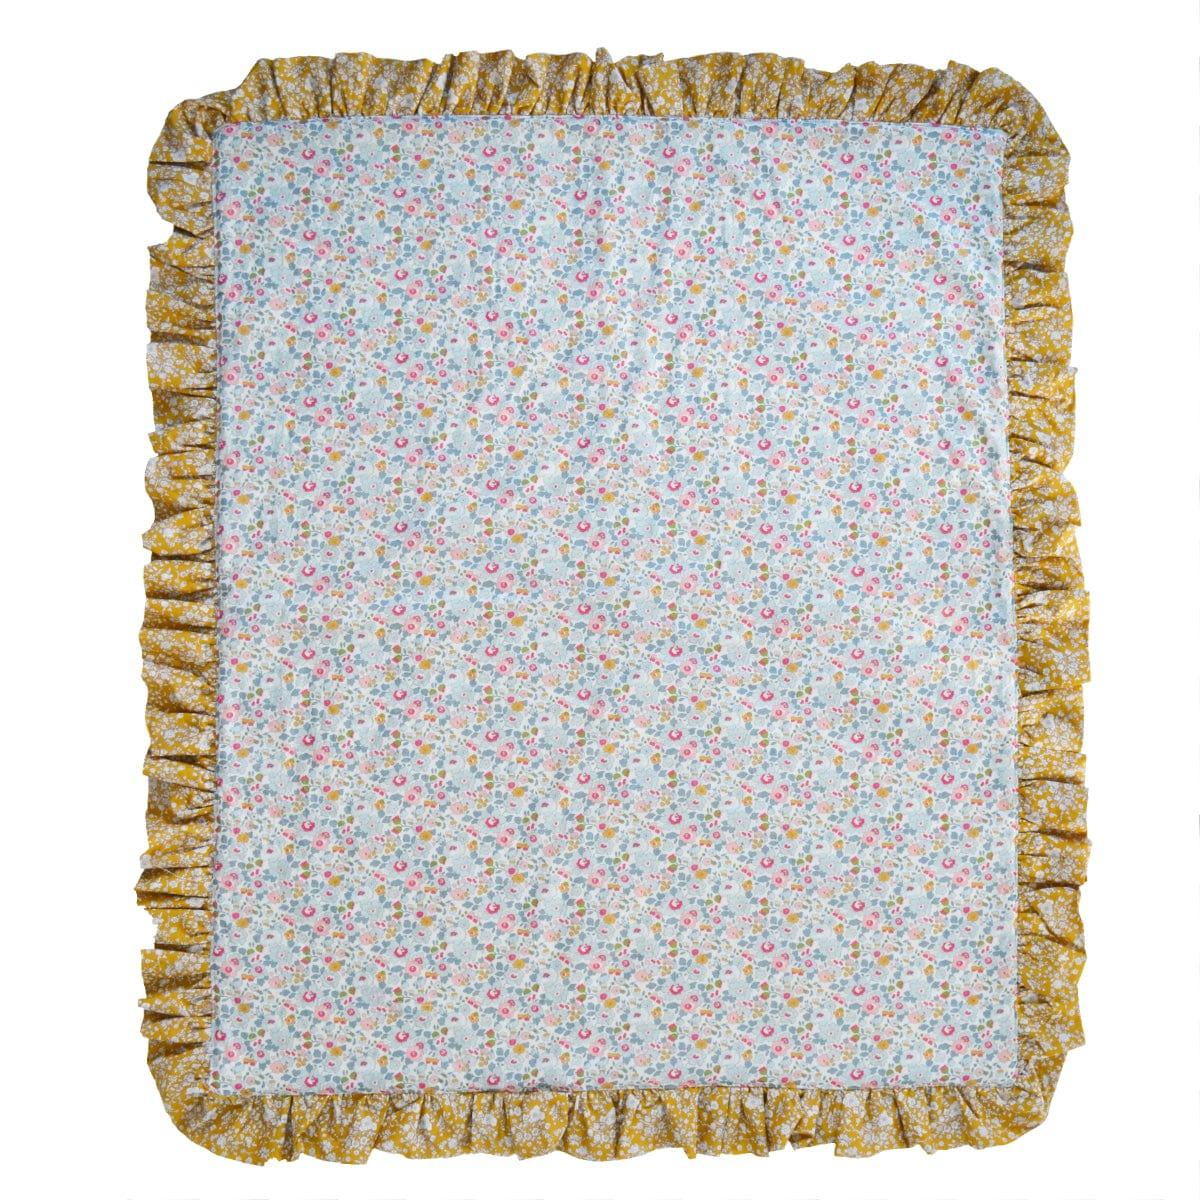 Ruffle Bedspread made with Liberty Fabric BETSY GREY & CAPEL MUSTARD - Coco & Wolf